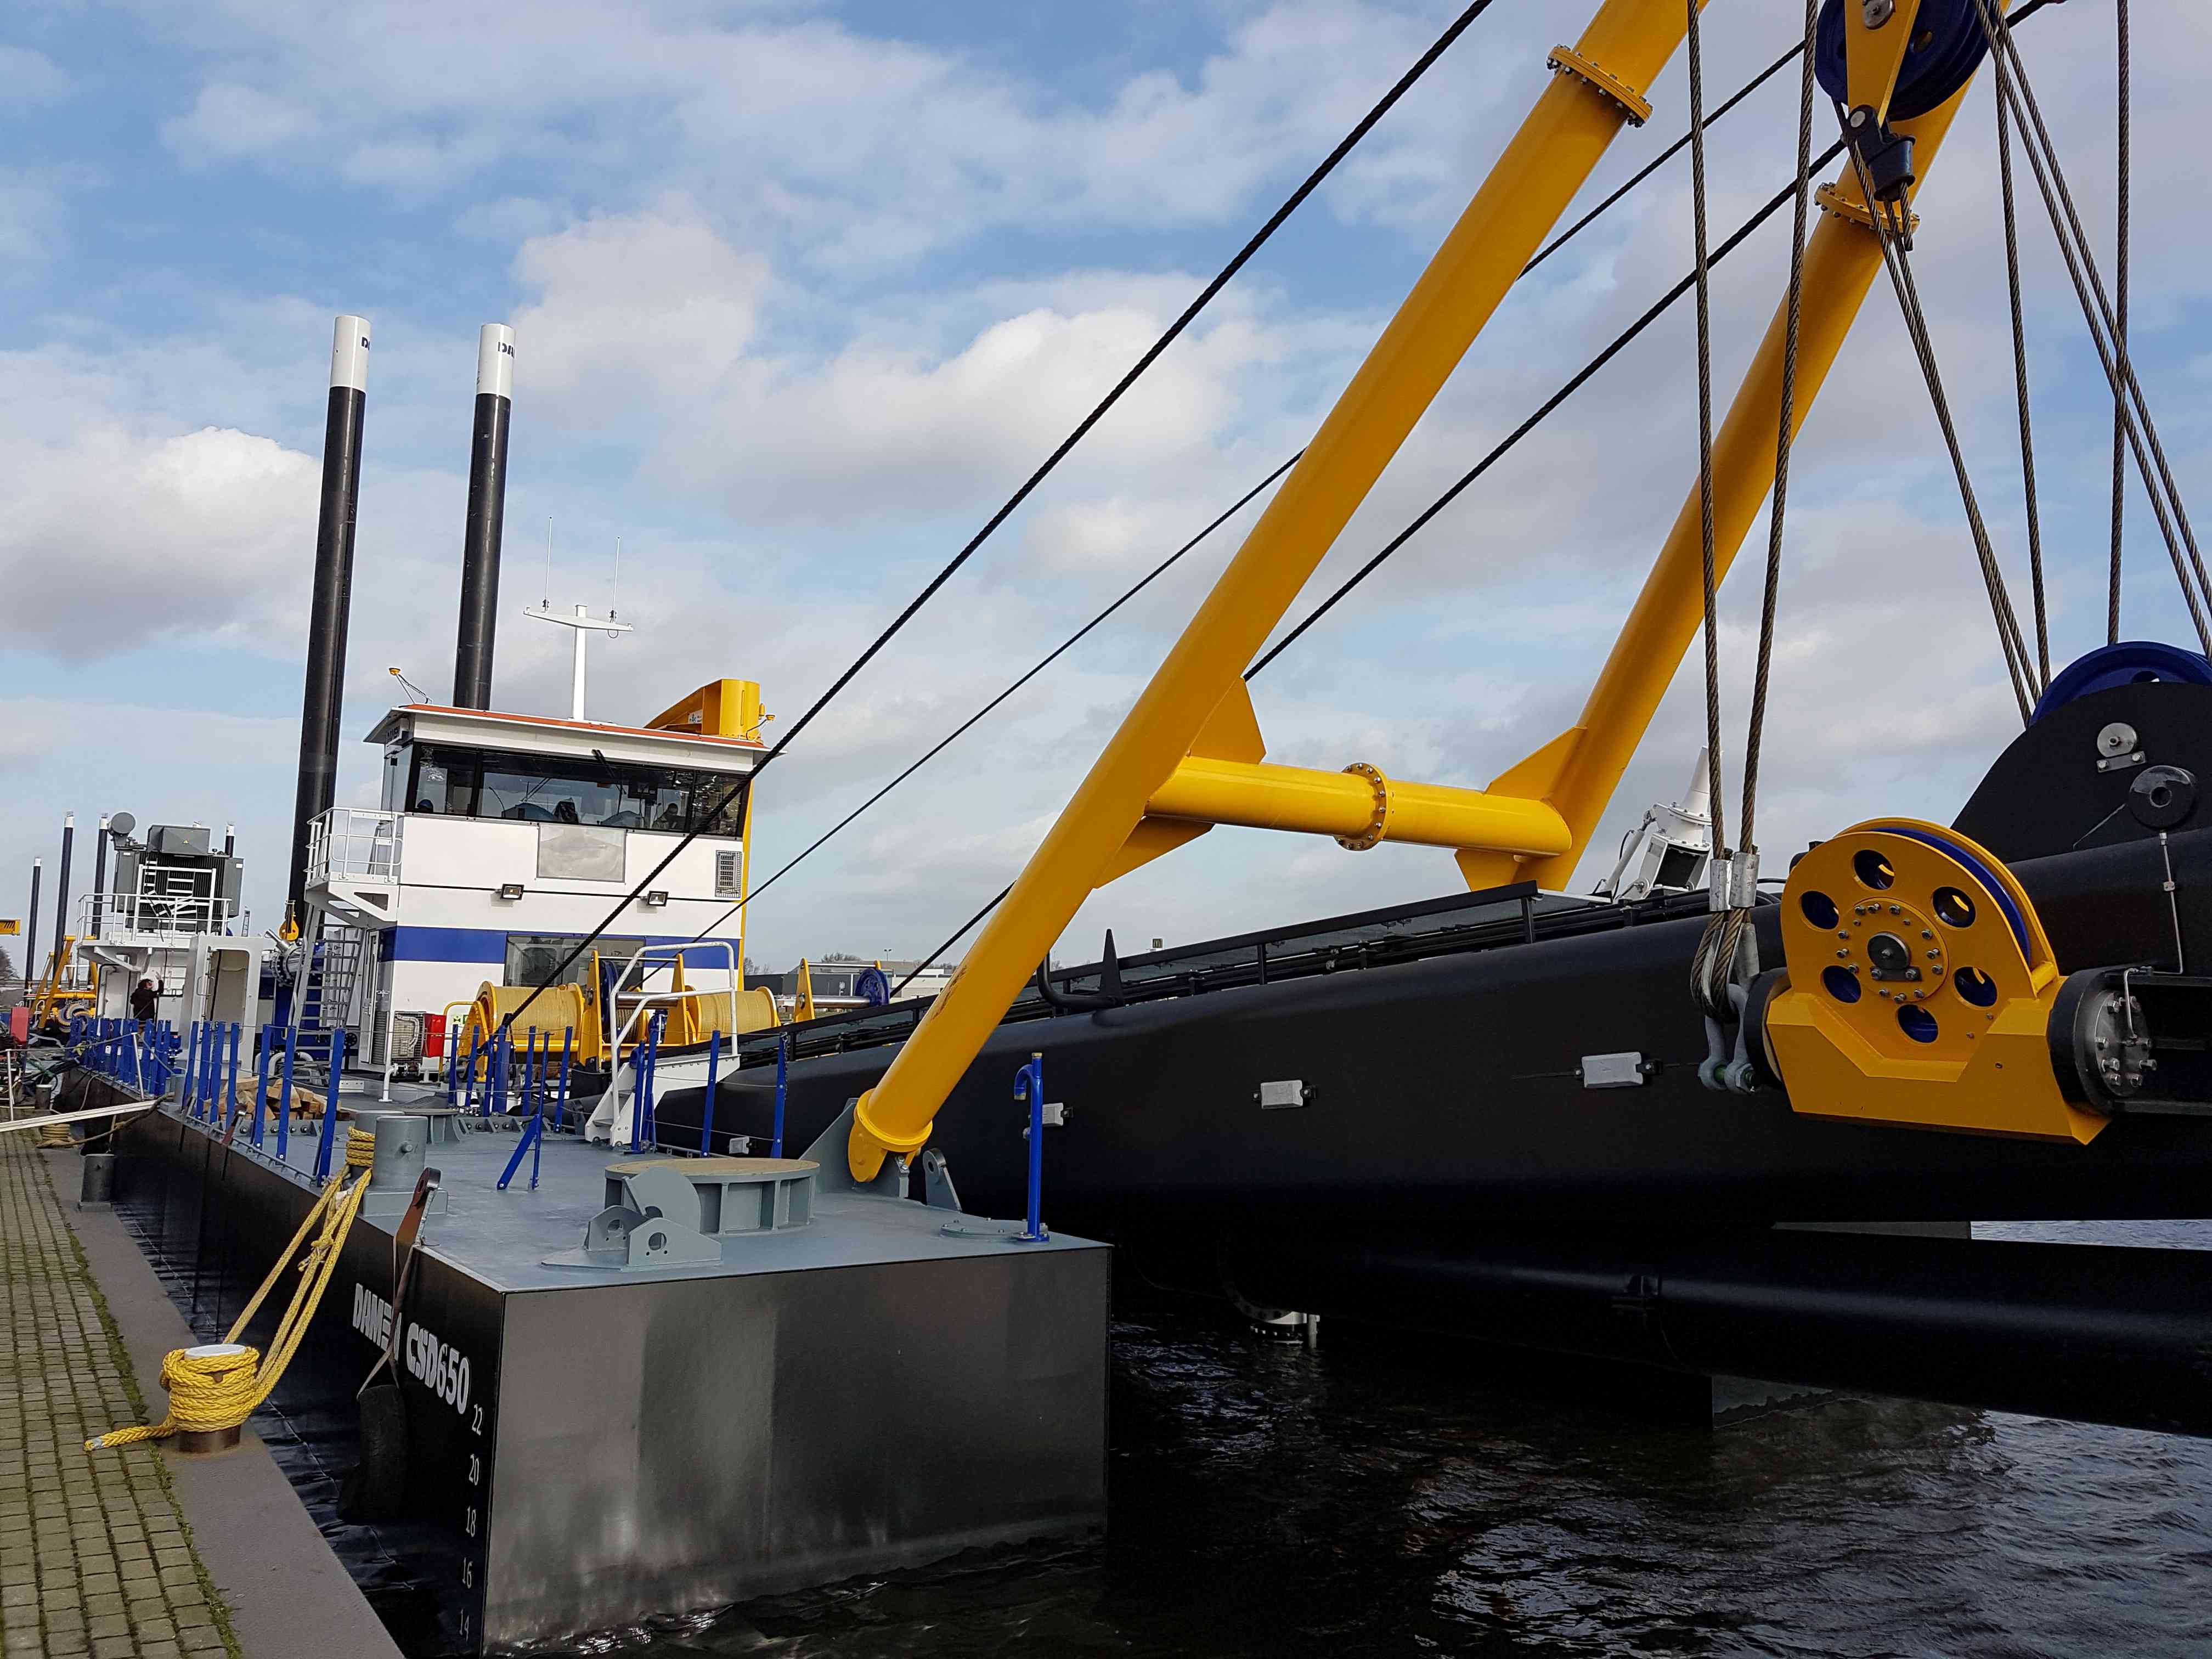 Damen Shipyards Group unveils the design of its first Electric Cutter Suction Dredger (ECSD) 650